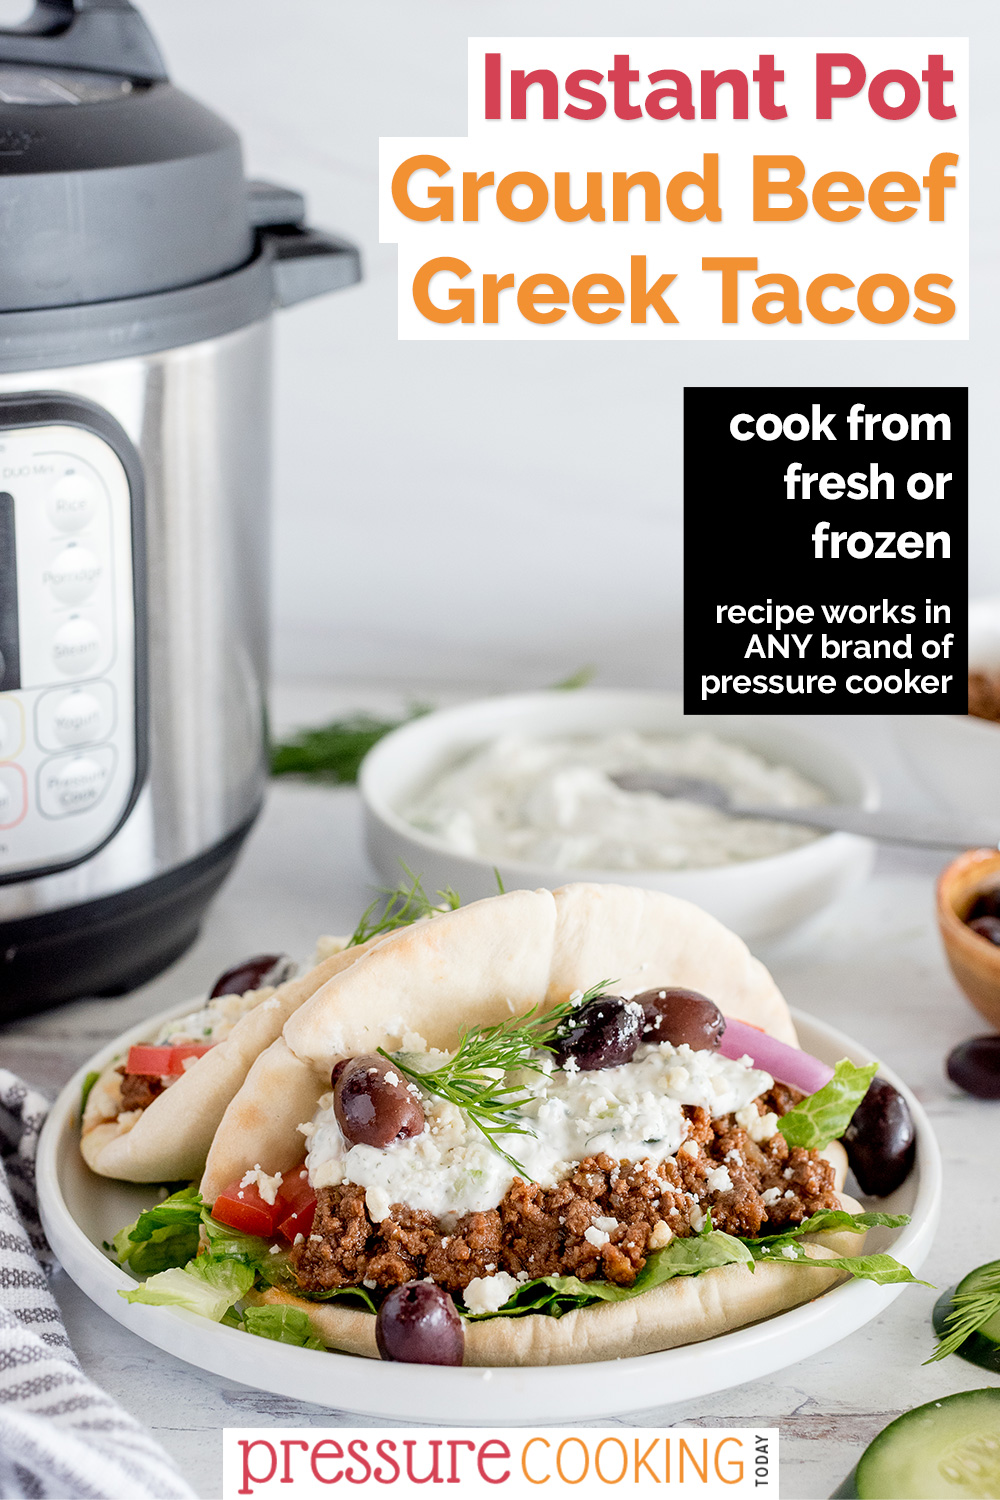 Pinterest image promoting Instant Pot Ground Beef Greek Tacos, with a photo of two greek tacos topped with white Tzatziki sauce, dill, and olives, with an Instant Pot and more Tzatziki sauce in the background via @PressureCook2da